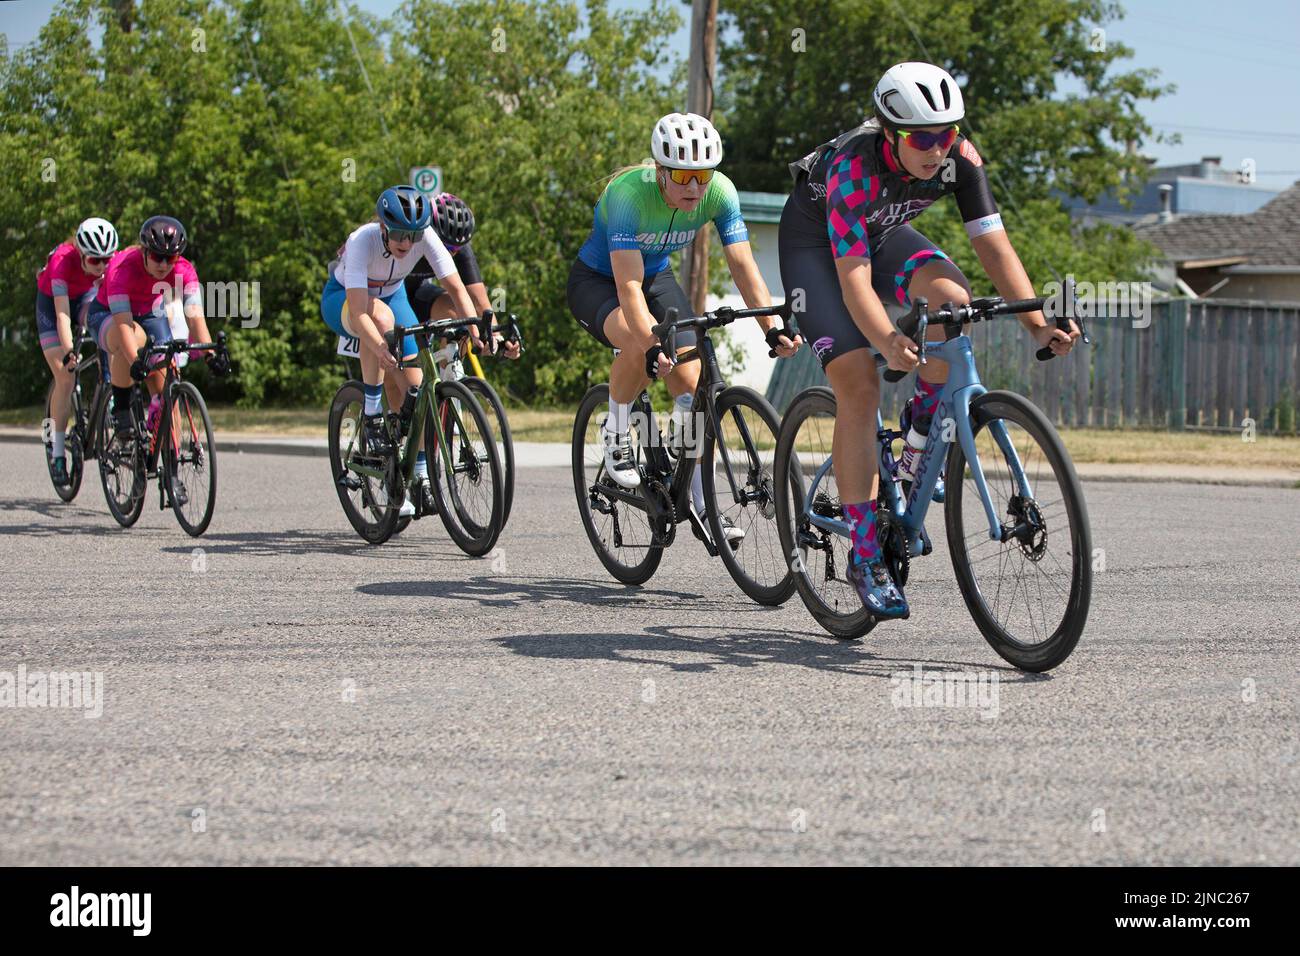 Female bicycle racers riding a lap of a Criterium, a cycling race where the women ride their bikes around a circuit on city streets. Stock Photo